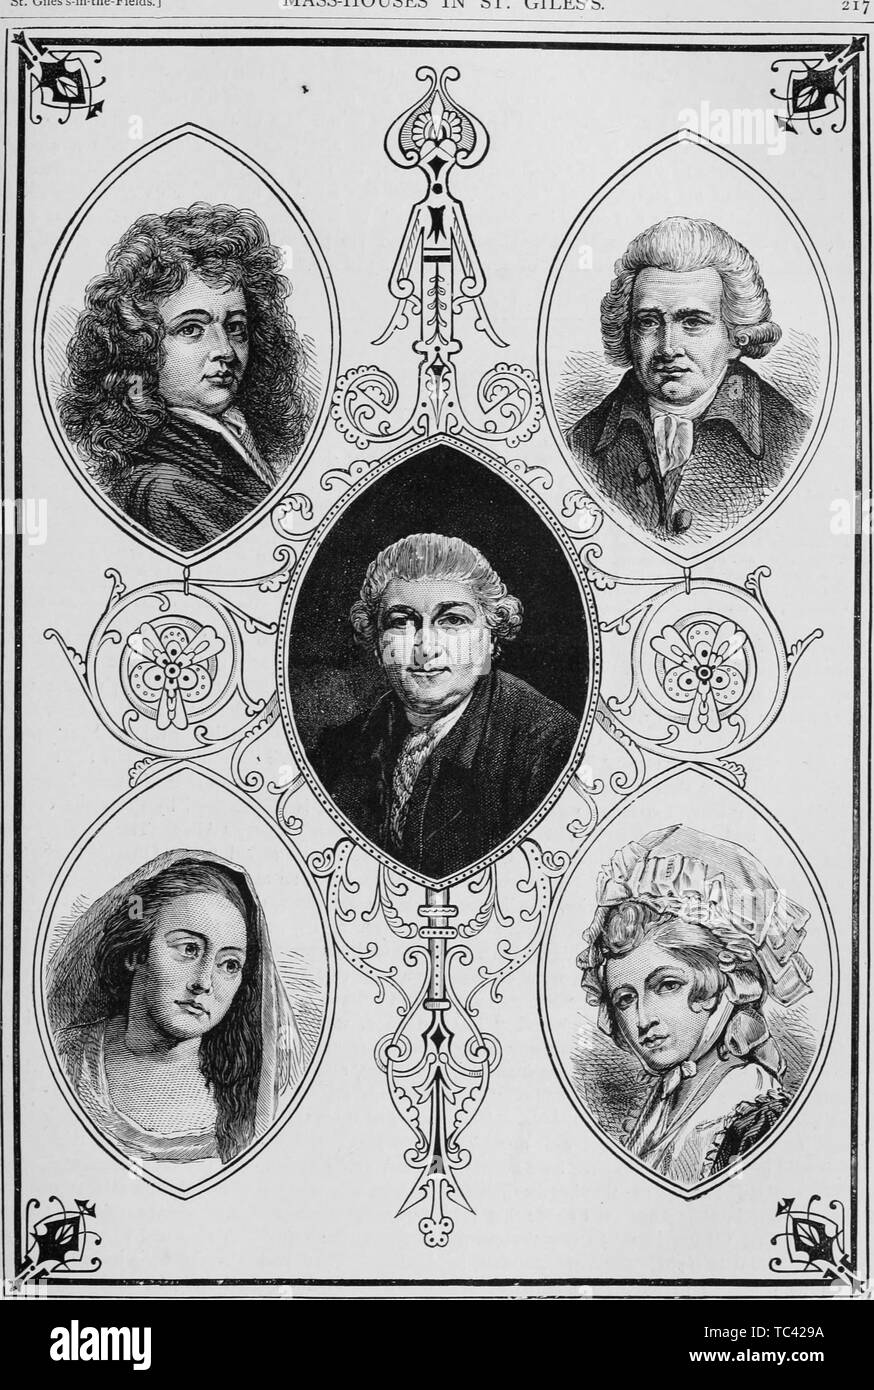 Engraving of the Drury Lane Theatre celebrities, London, England, from the book 'Old and new London: a narrative of its history, its people, and its places' by Thornbury Walter, 1873. Courtesy Internet Archive. () Stock Photo